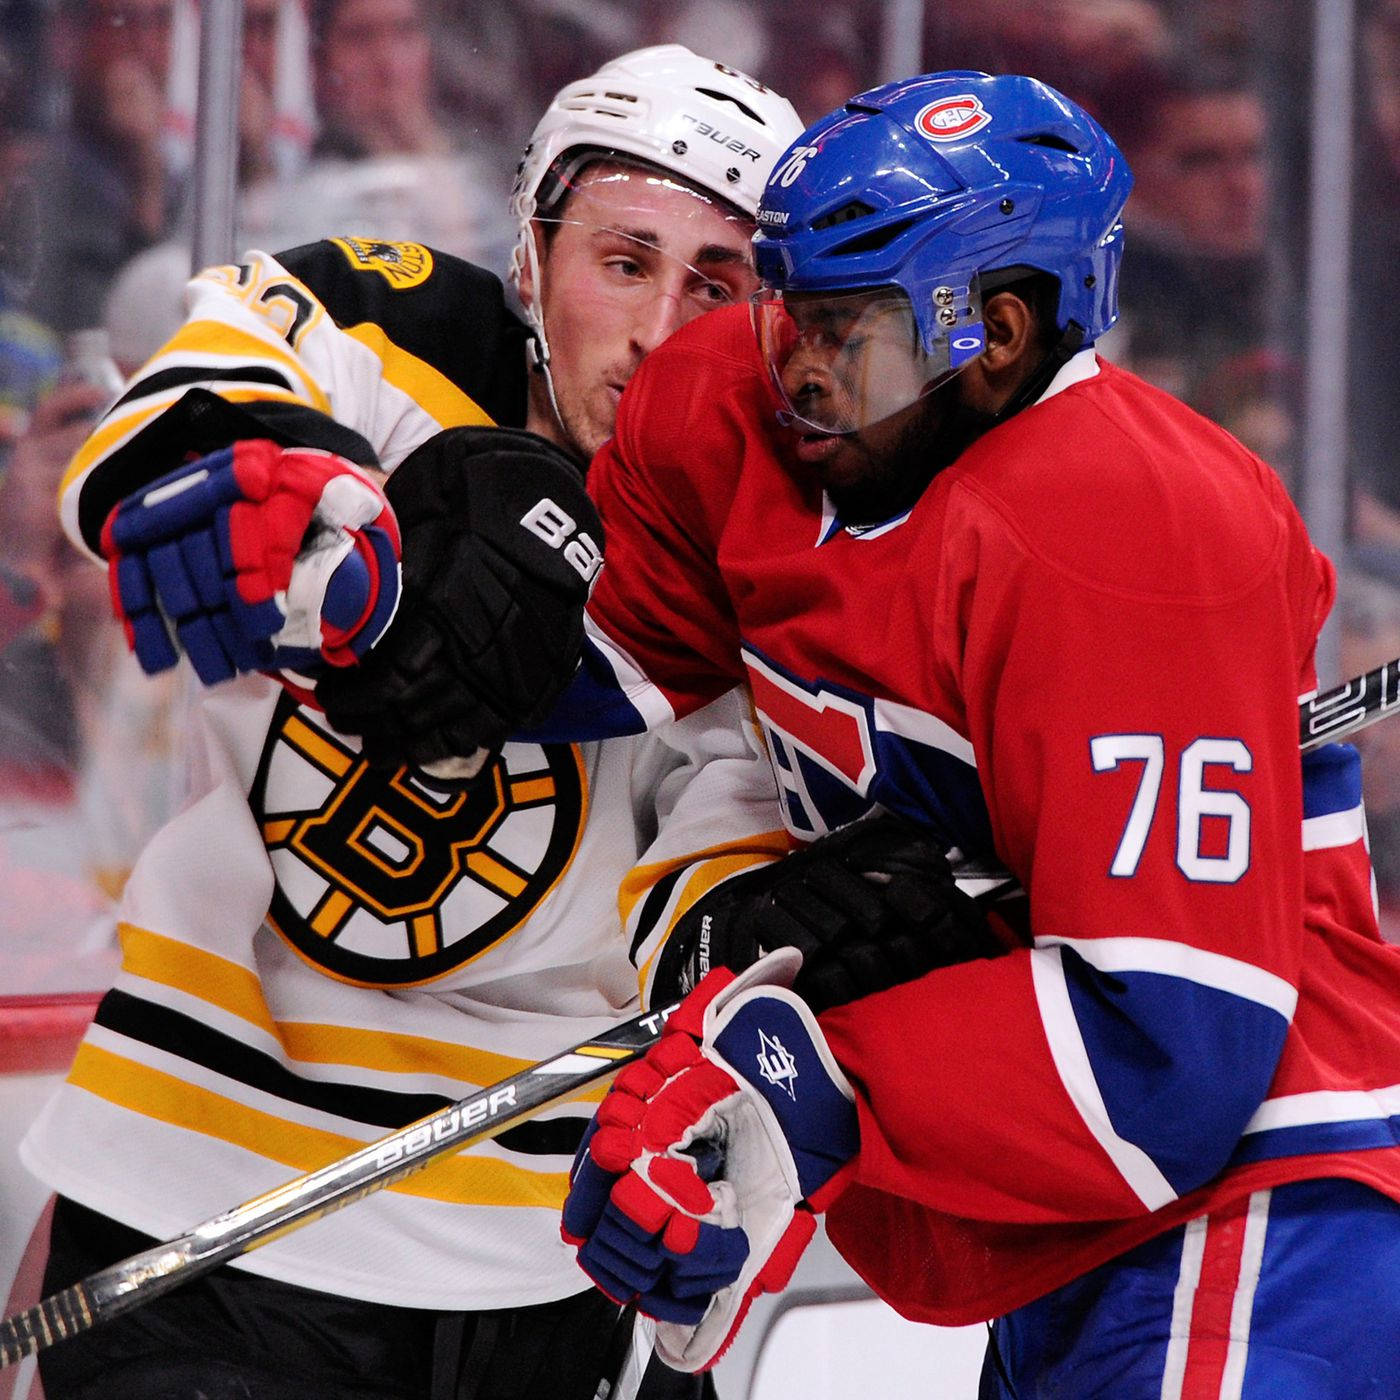 Boston Bruins Forward Brad Marchand In A Face-off Against P.k. Subban.